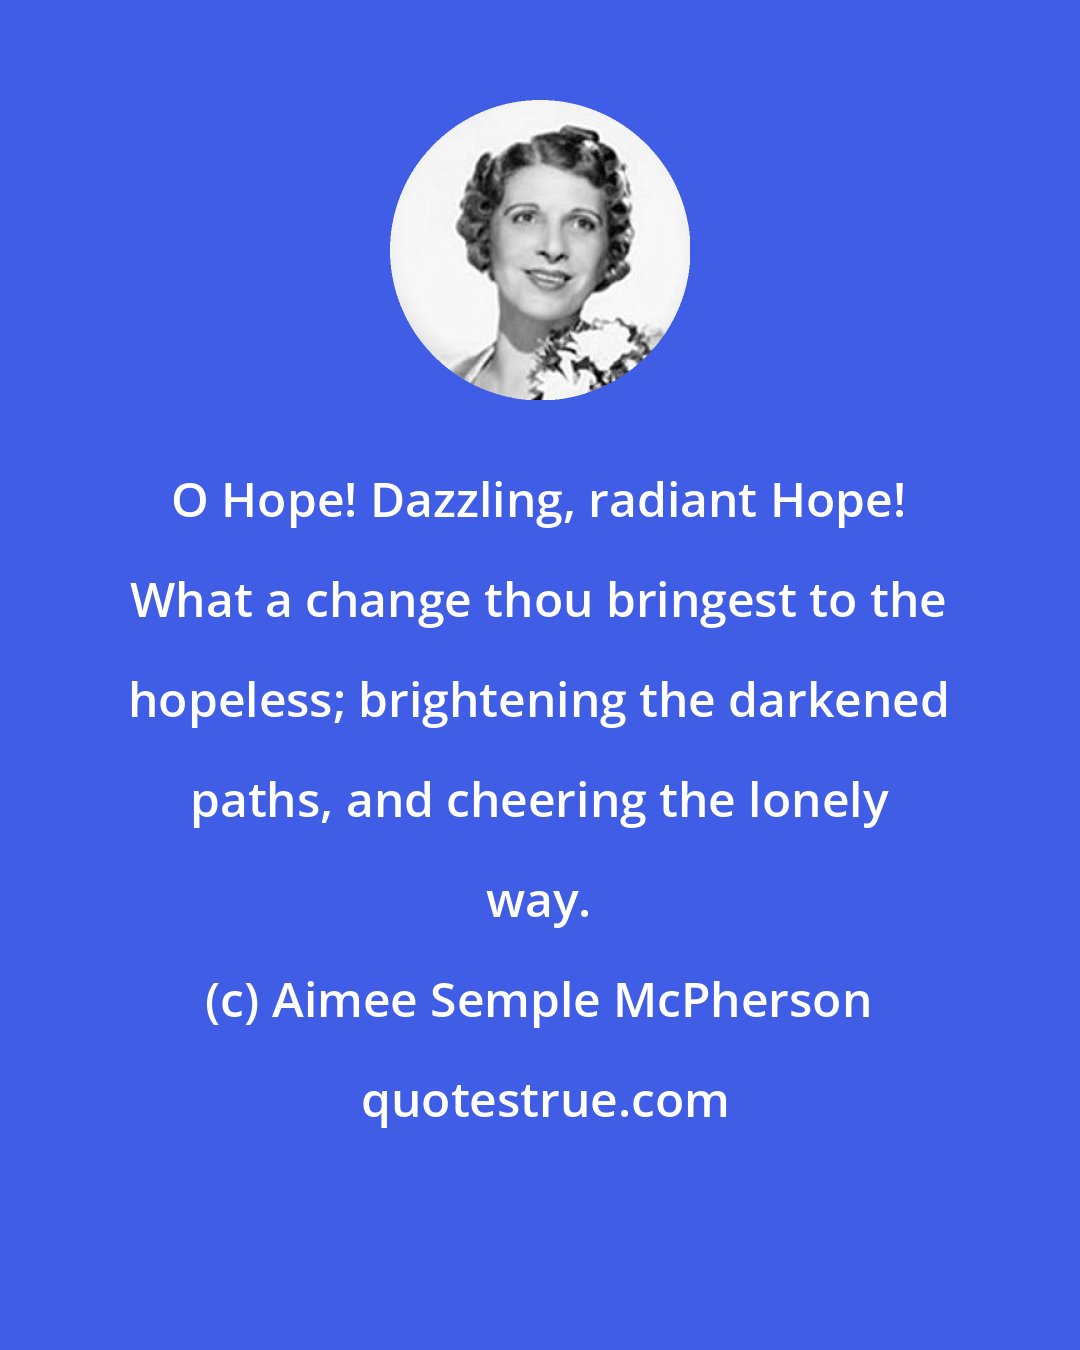 Aimee Semple McPherson: O Hope! Dazzling, radiant Hope! What a change thou bringest to the hopeless; brightening the darkened paths, and cheering the lonely way.